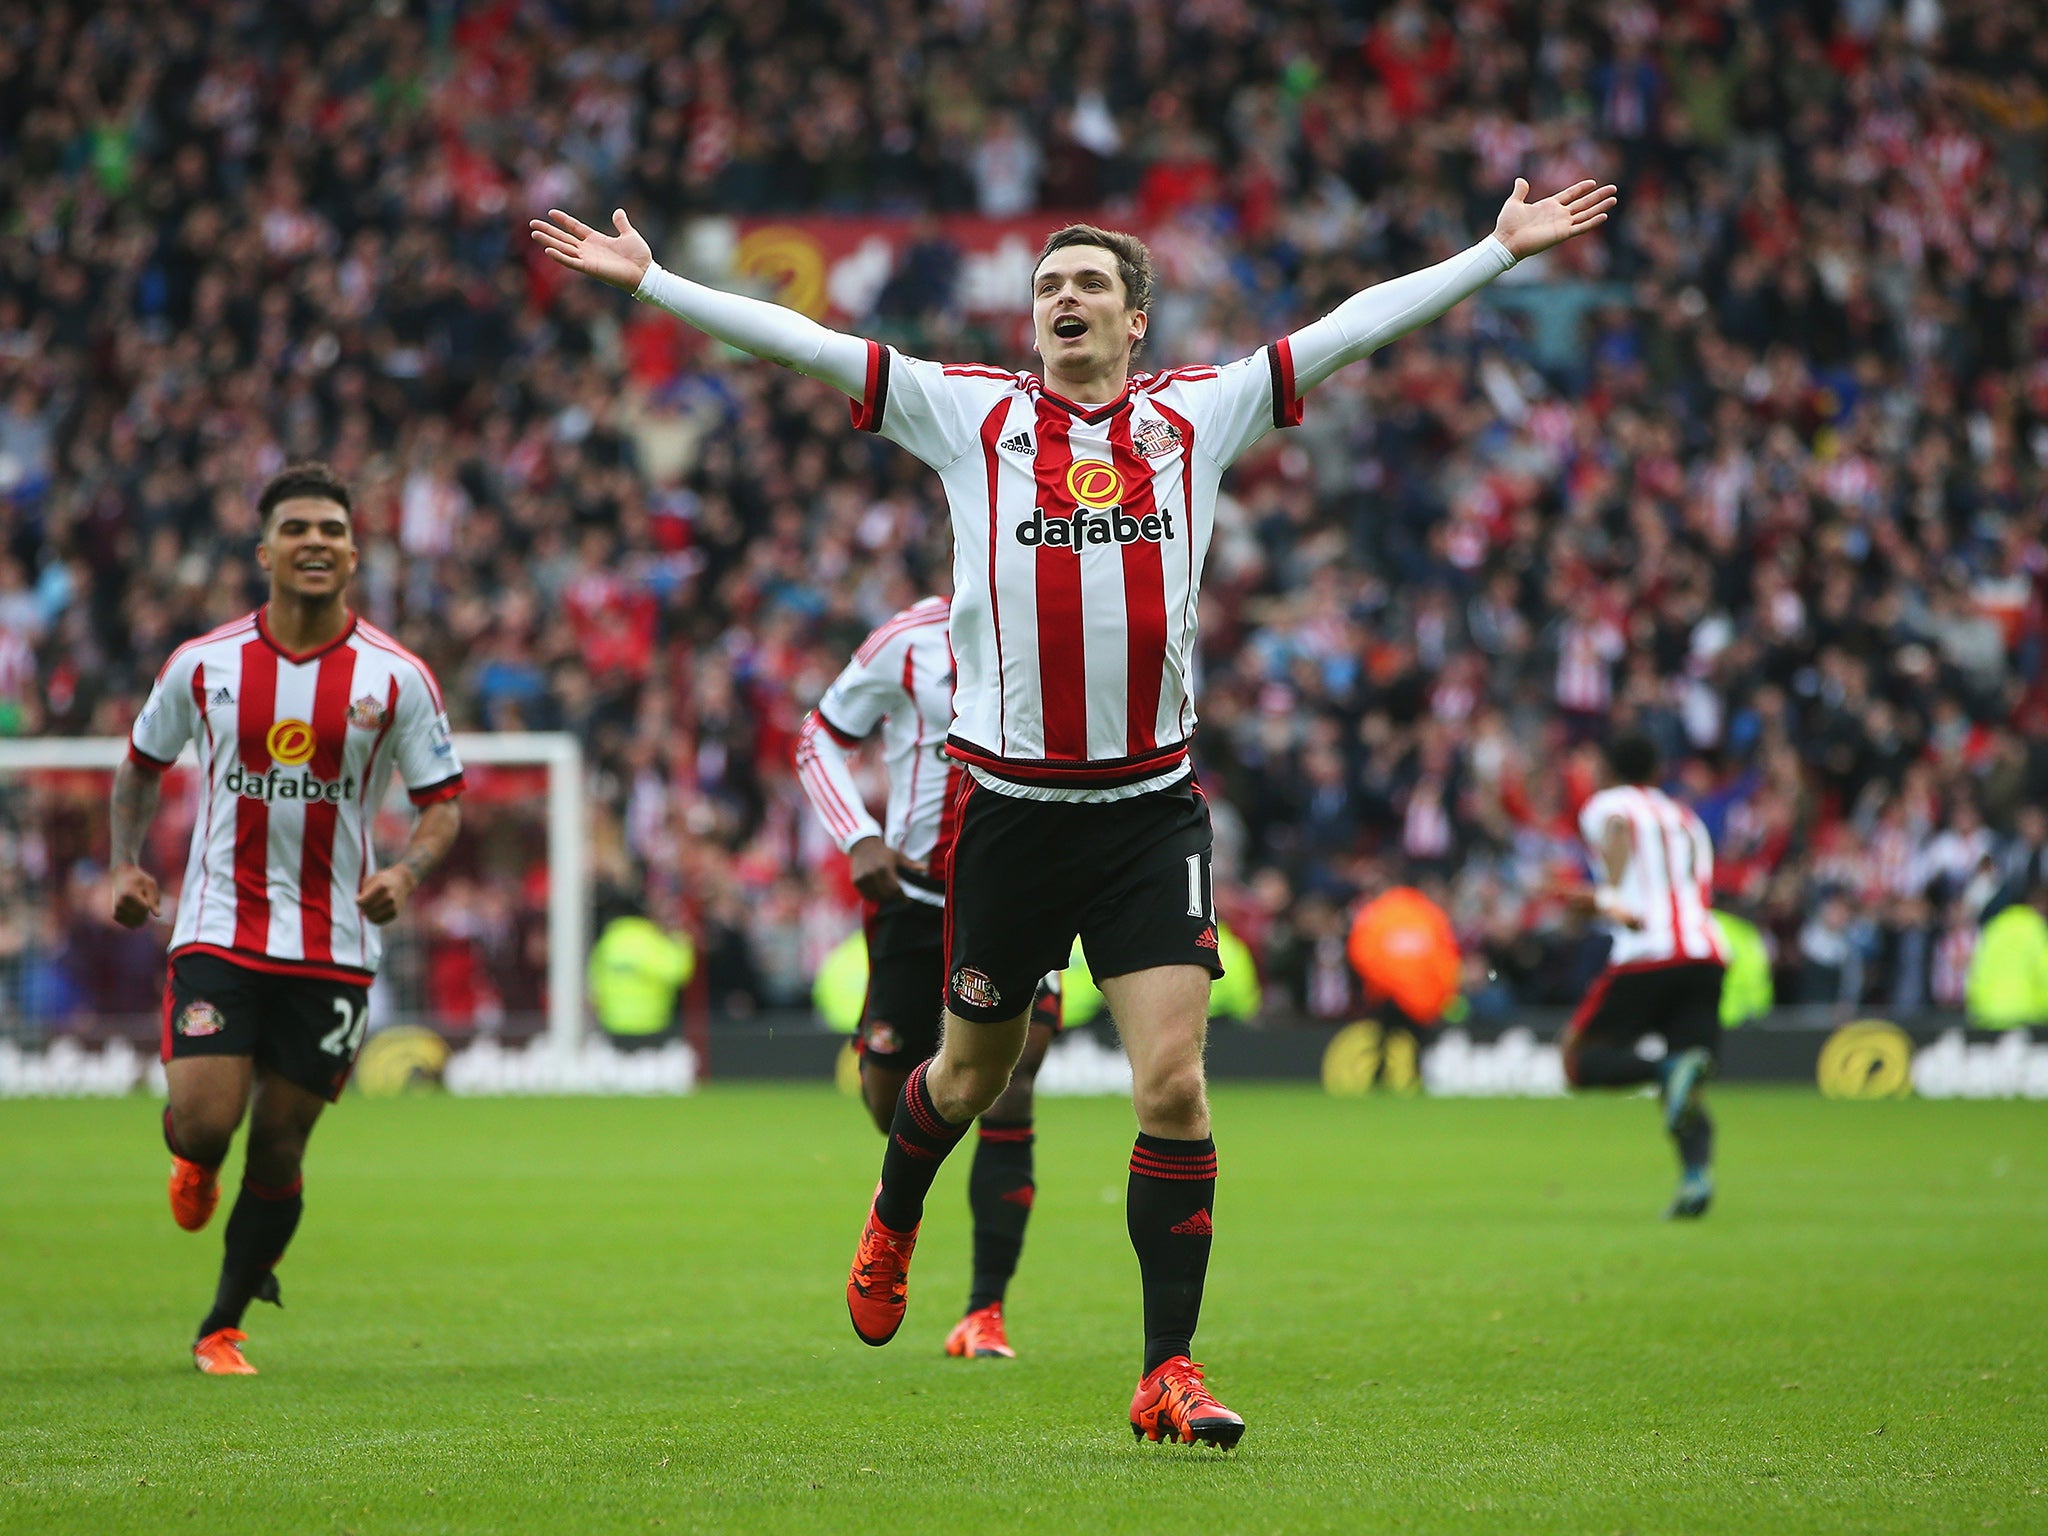 Adam Johnson celebrates his goal in front of the Newcastle fans